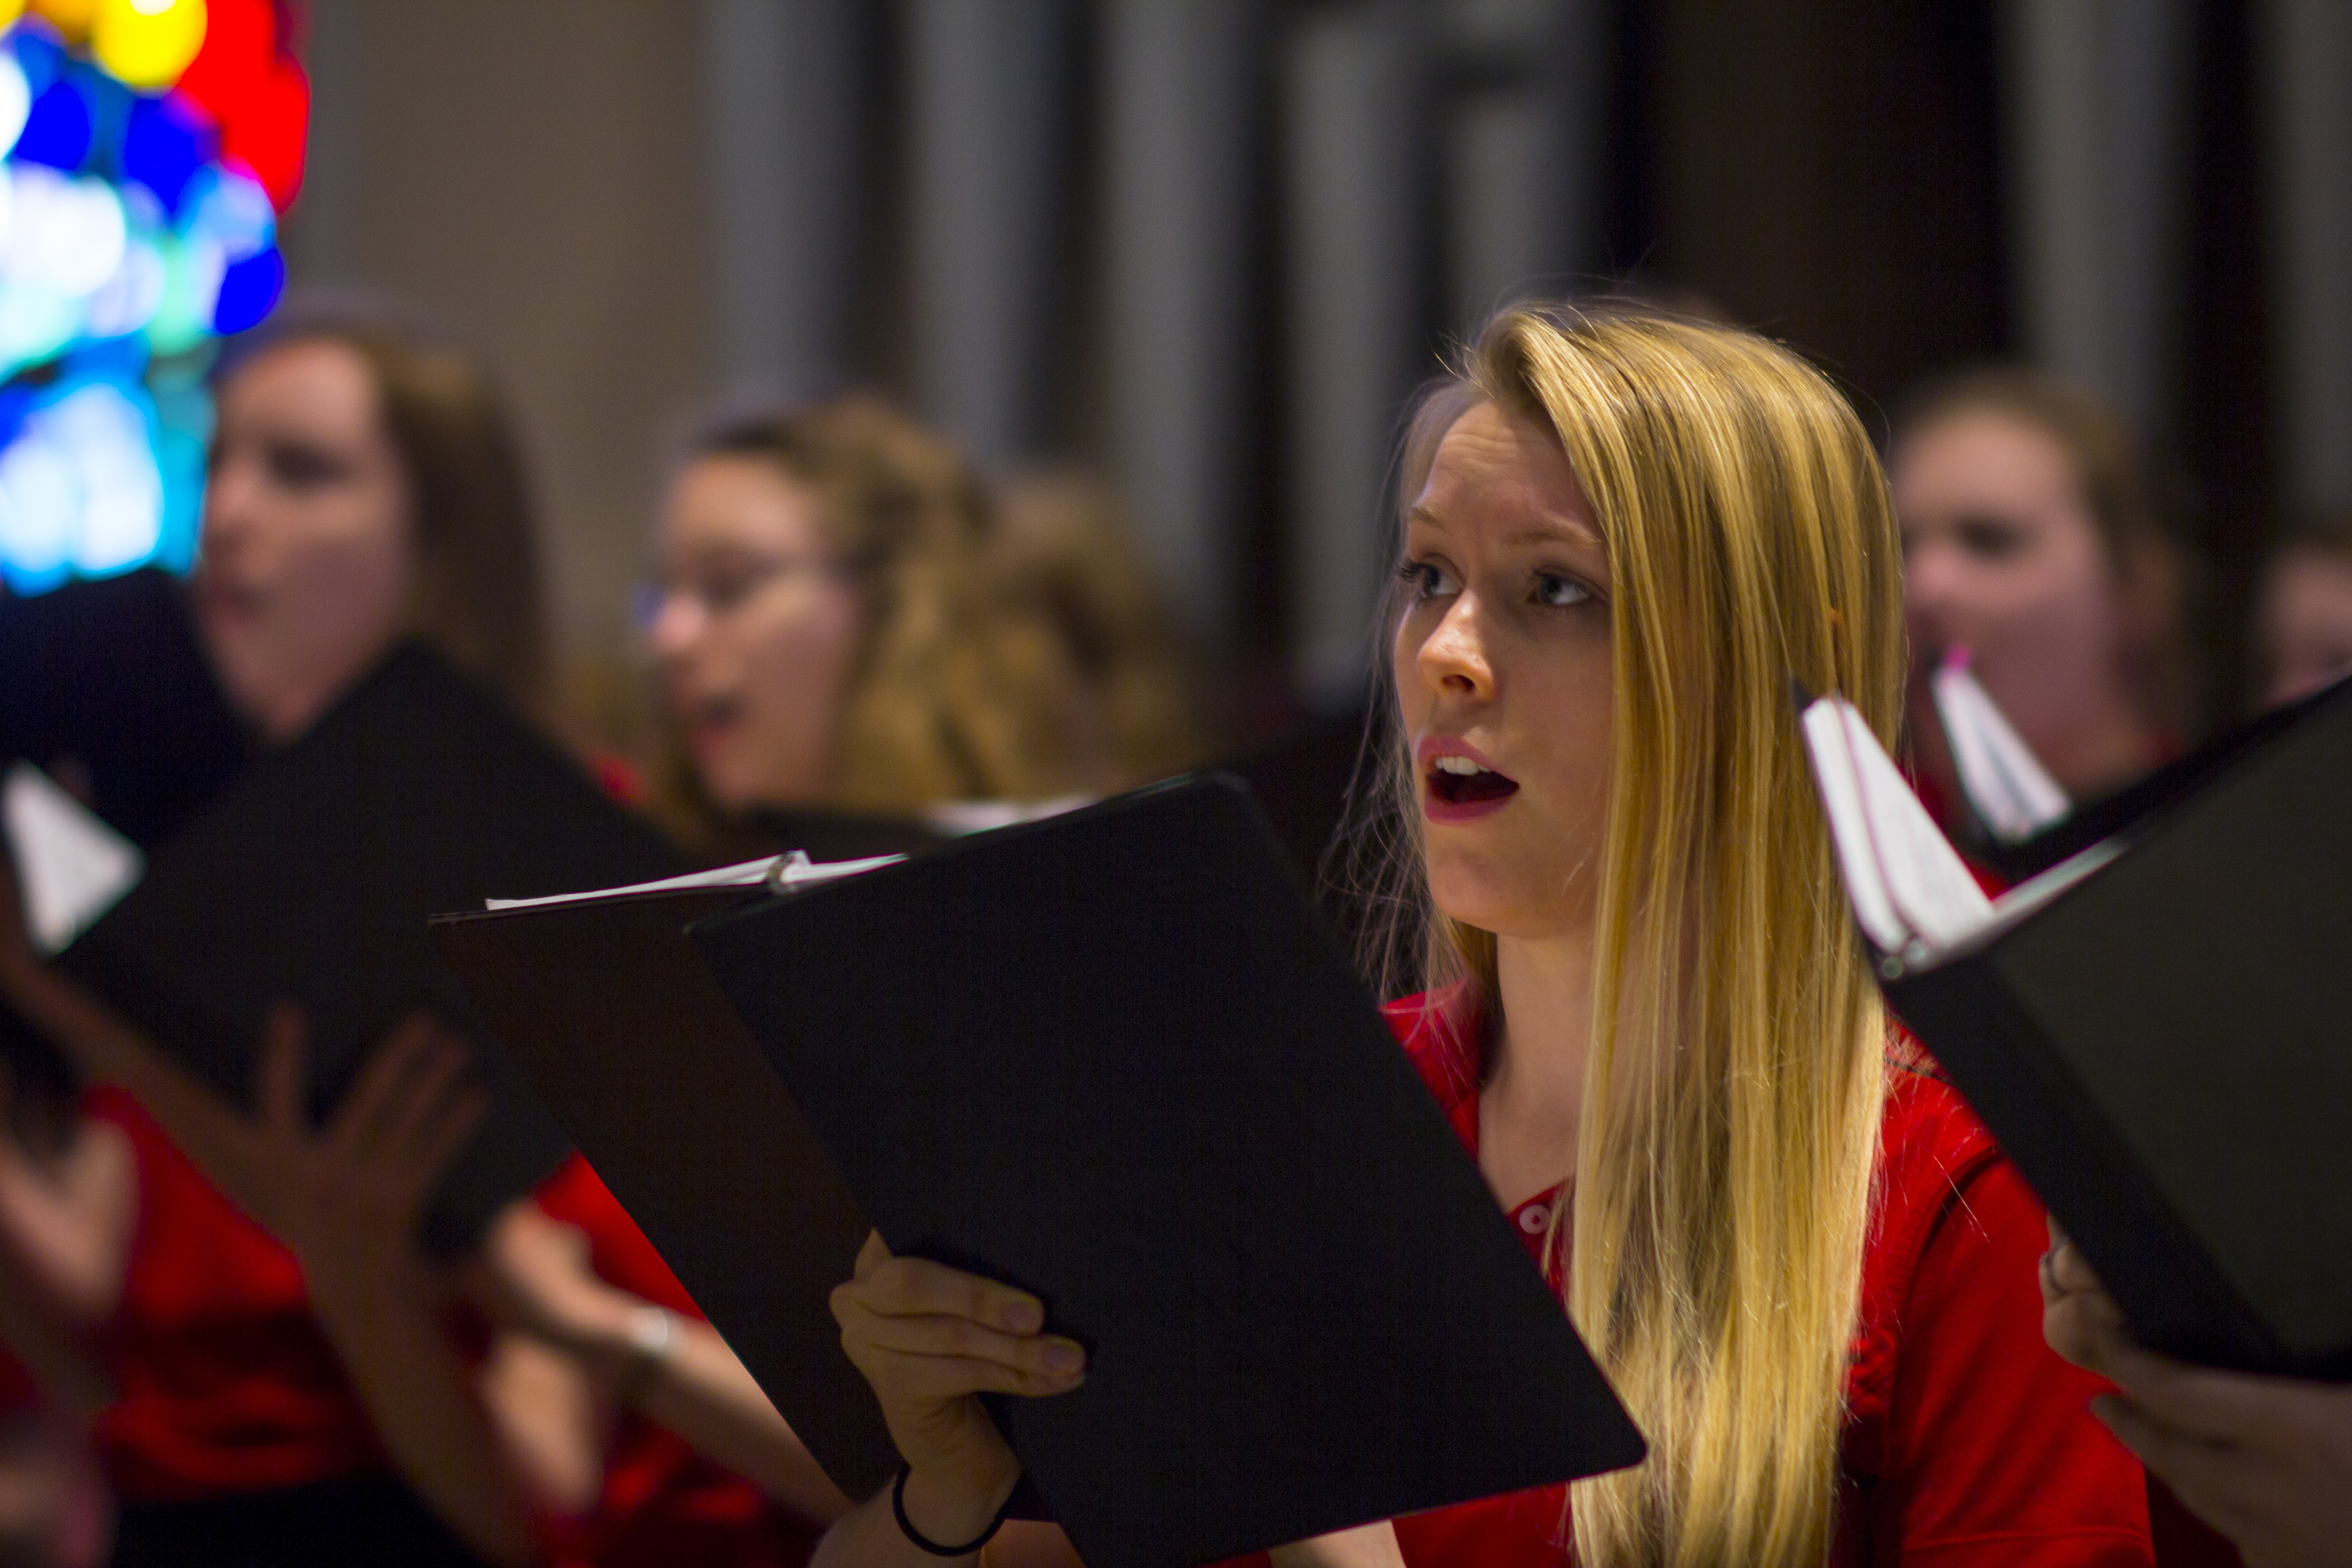 Bethany Lutheran College Choirs Indianola